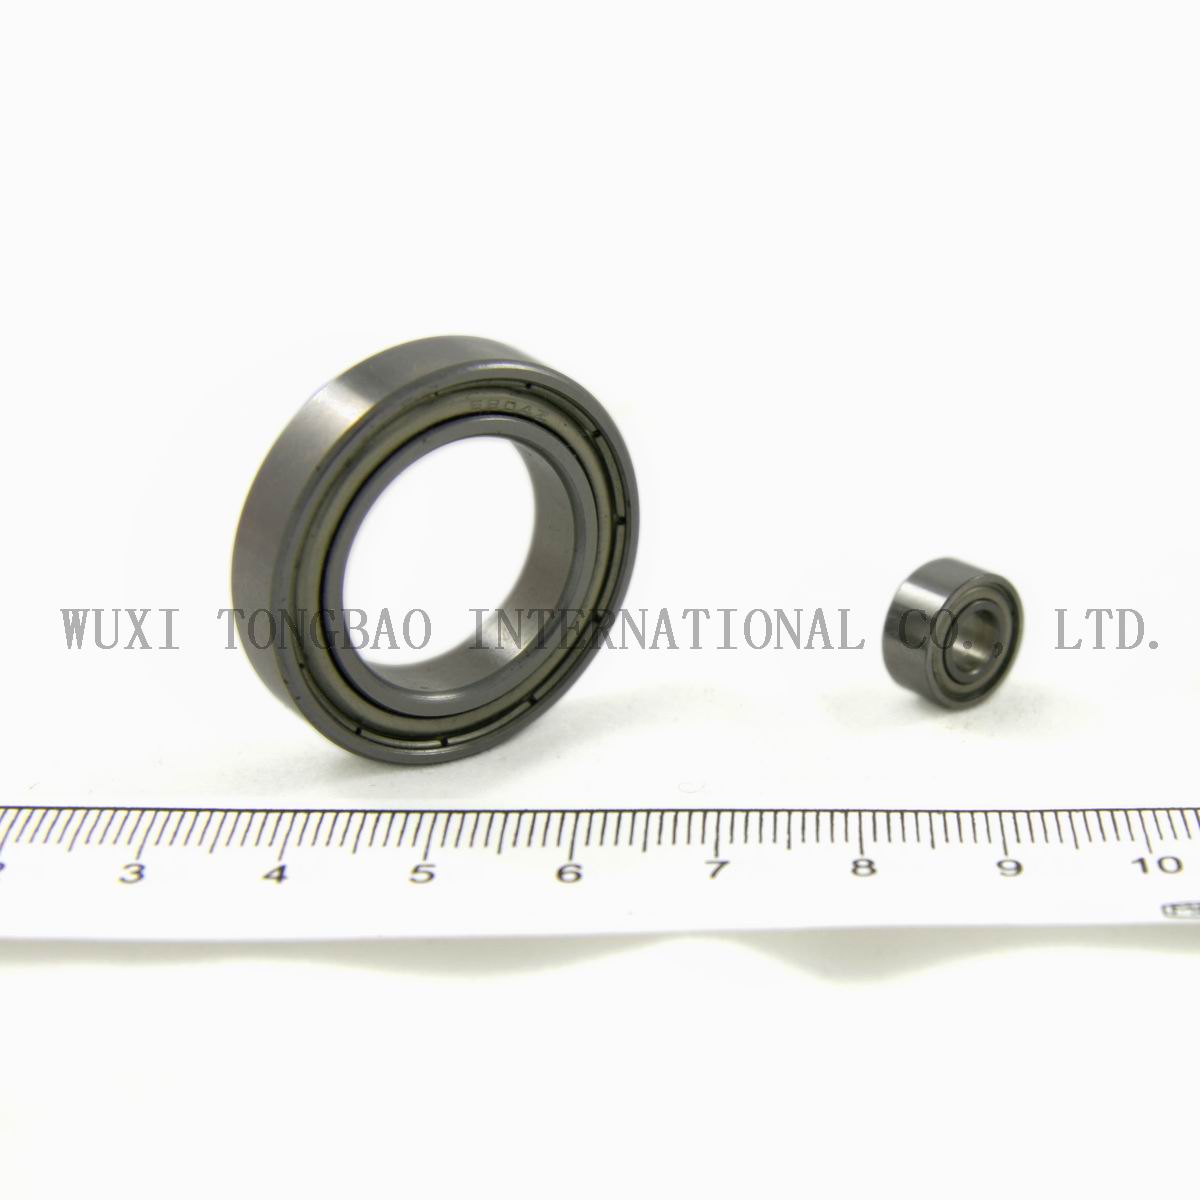 Short Lead Time for Jade Roller - Really Precision Angular Contact high speed Ball Bearing – Tongbao